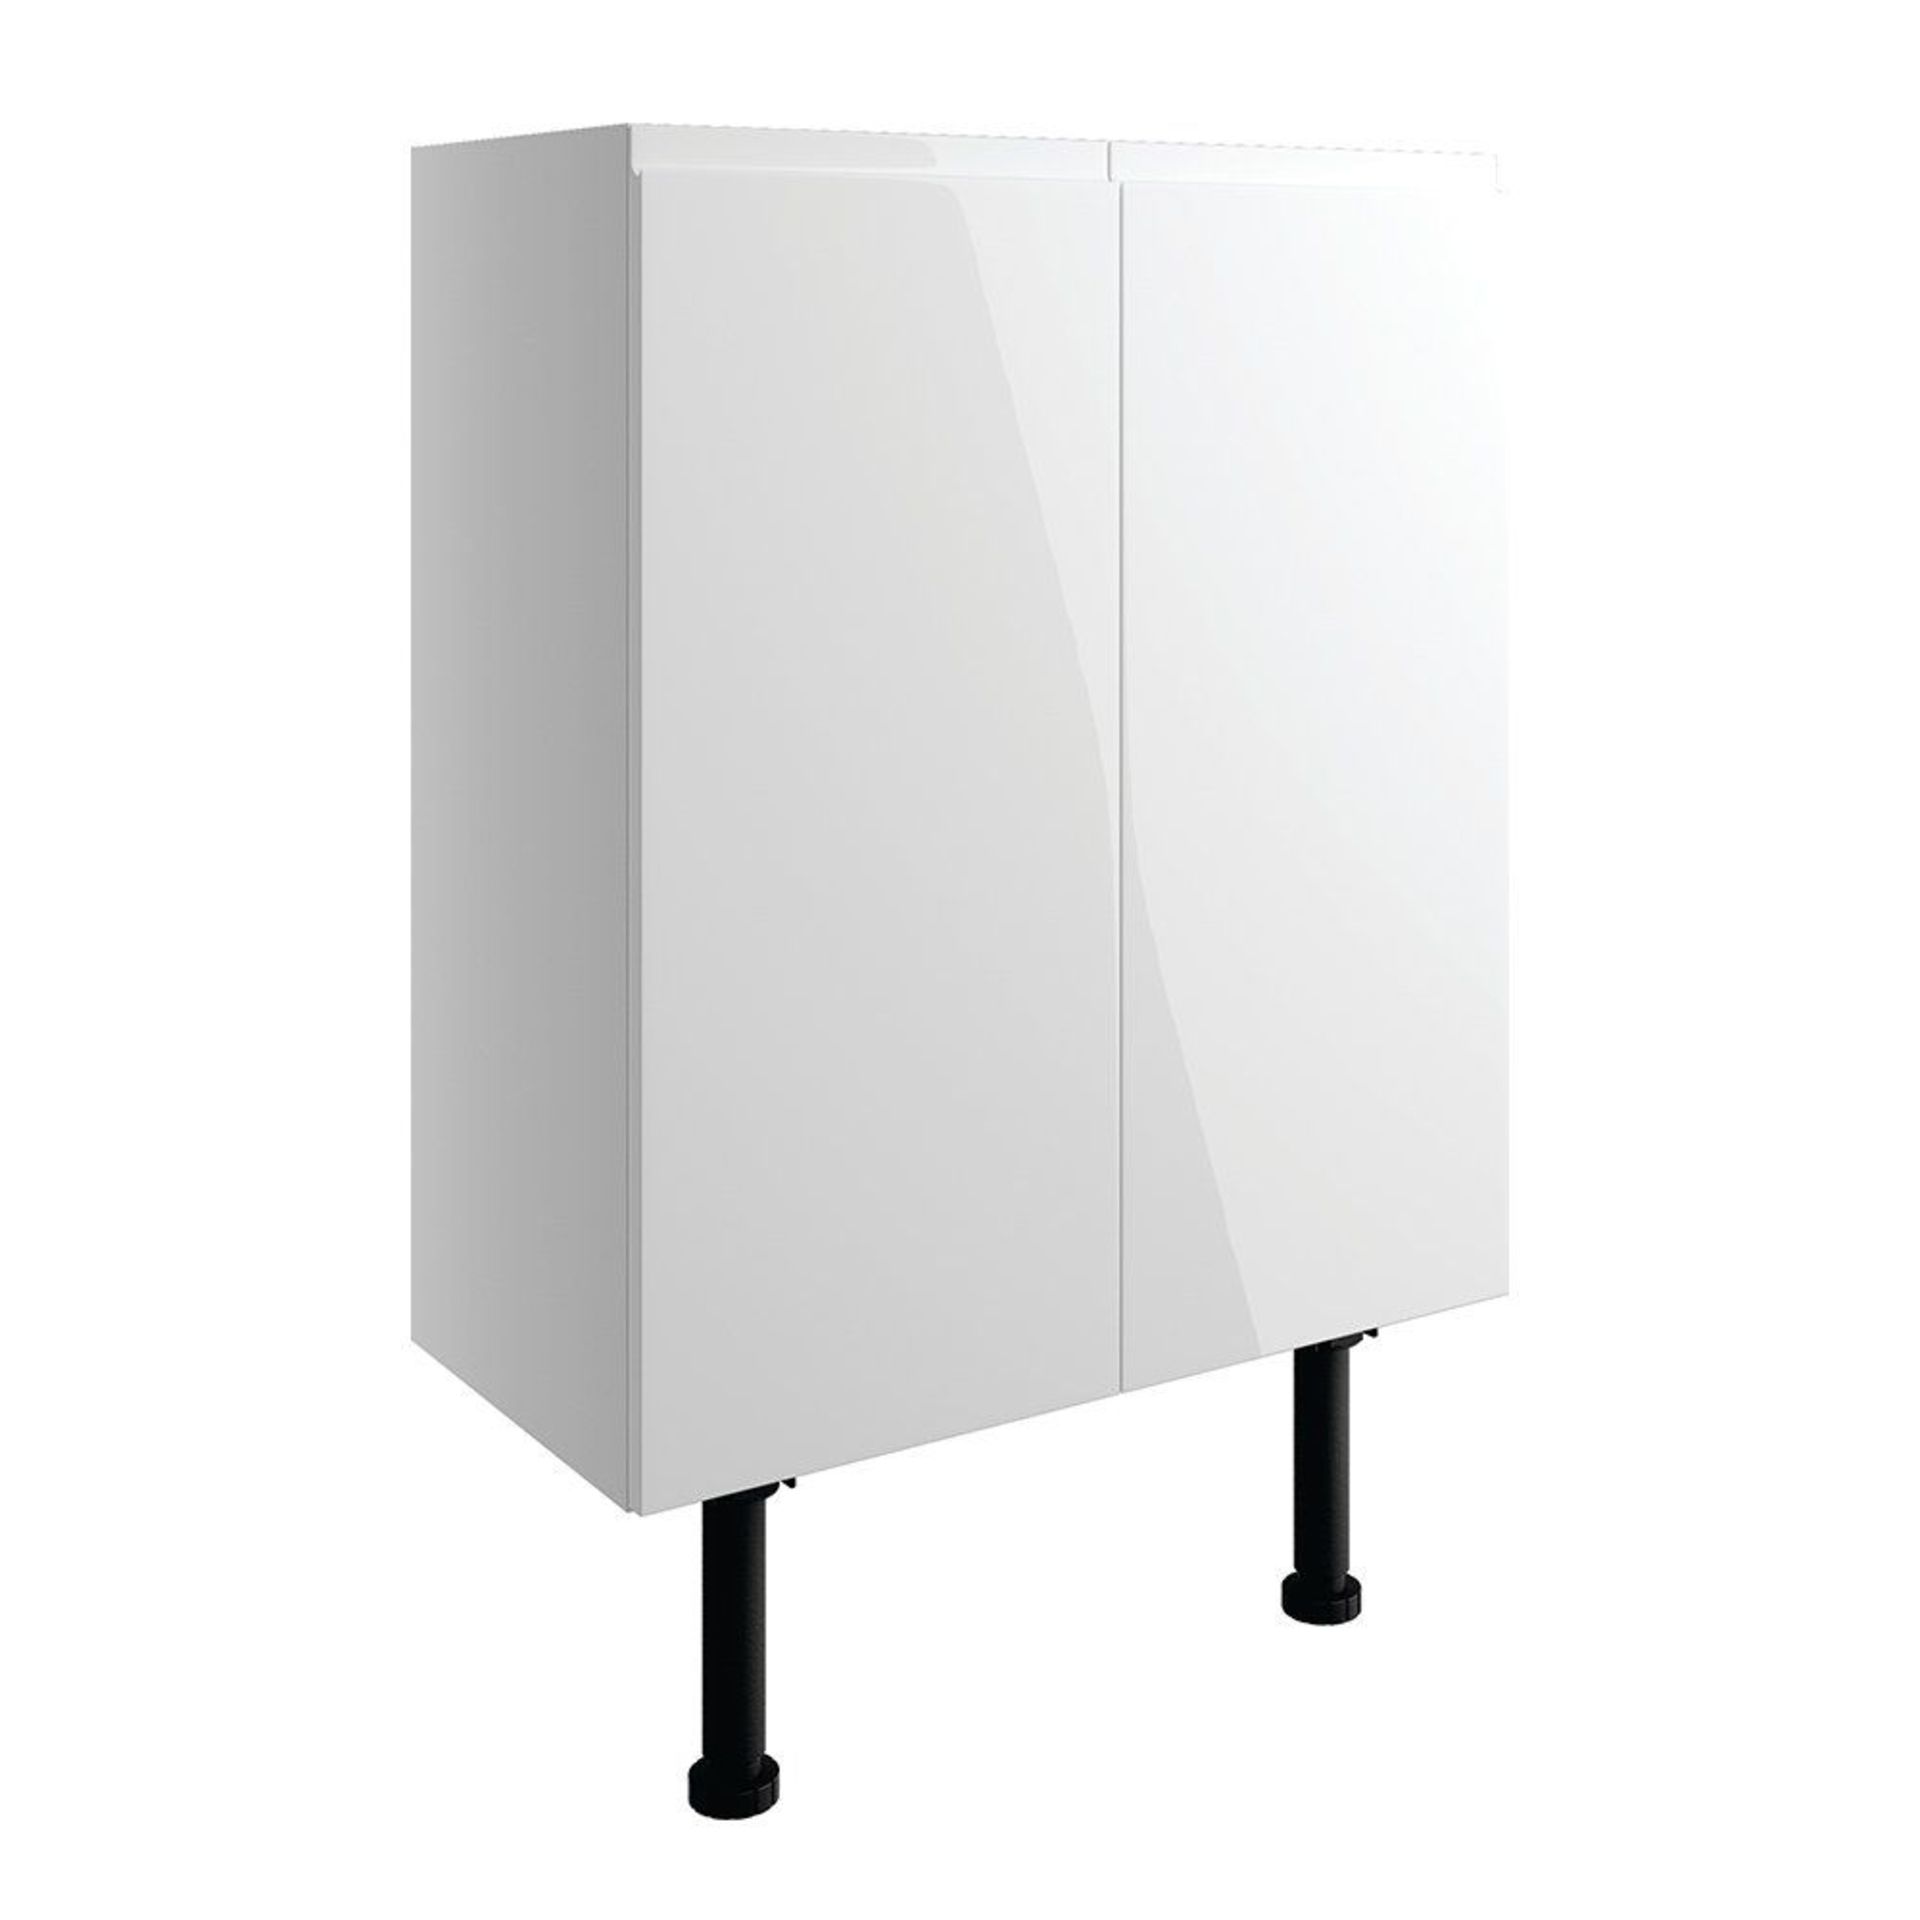 New (Aa60) Valesso 600mm 2 Door Full Depth Base Unit - White Gloss. Soft Close Fittings. Durab...